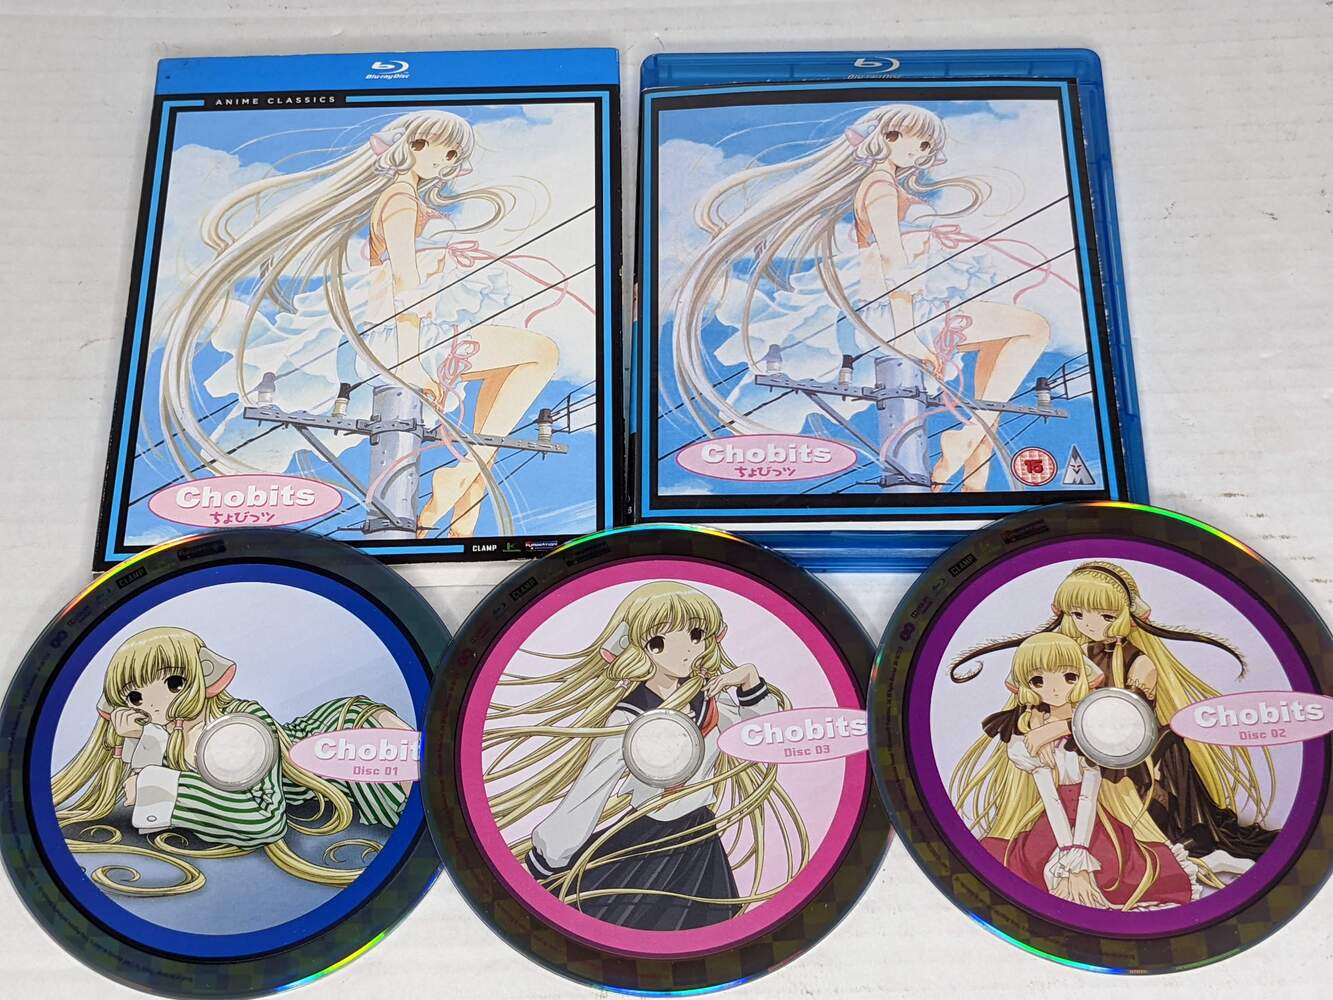 Chobits: The Complete Series (Blu-ray Disc, 2011, 3-Disc Set)